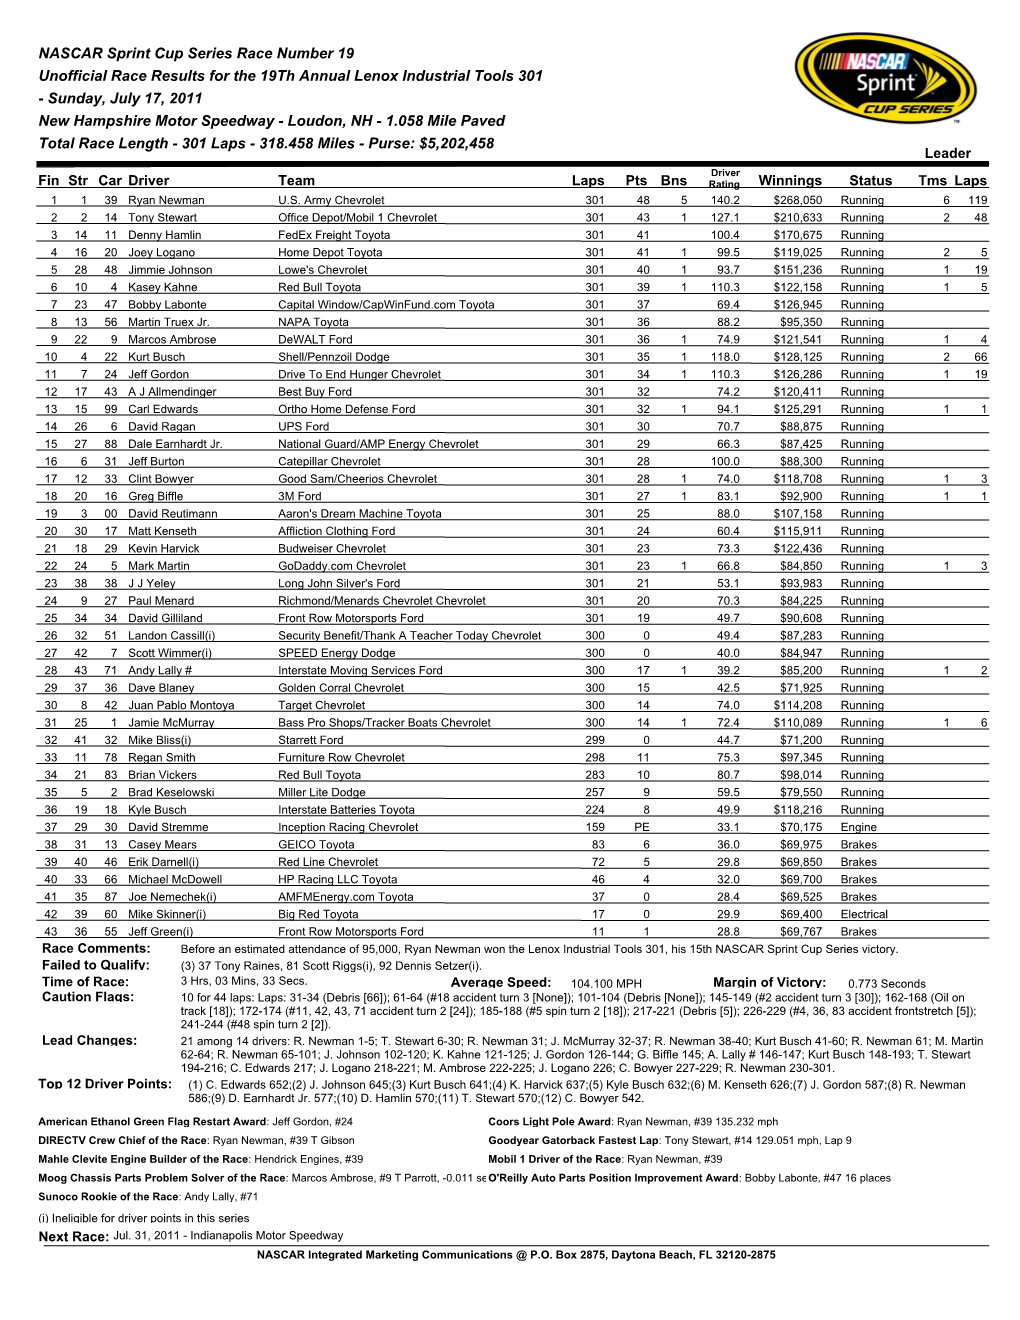 NASCAR Sprint Cup Series Race Number 19 Unofficial Race Results